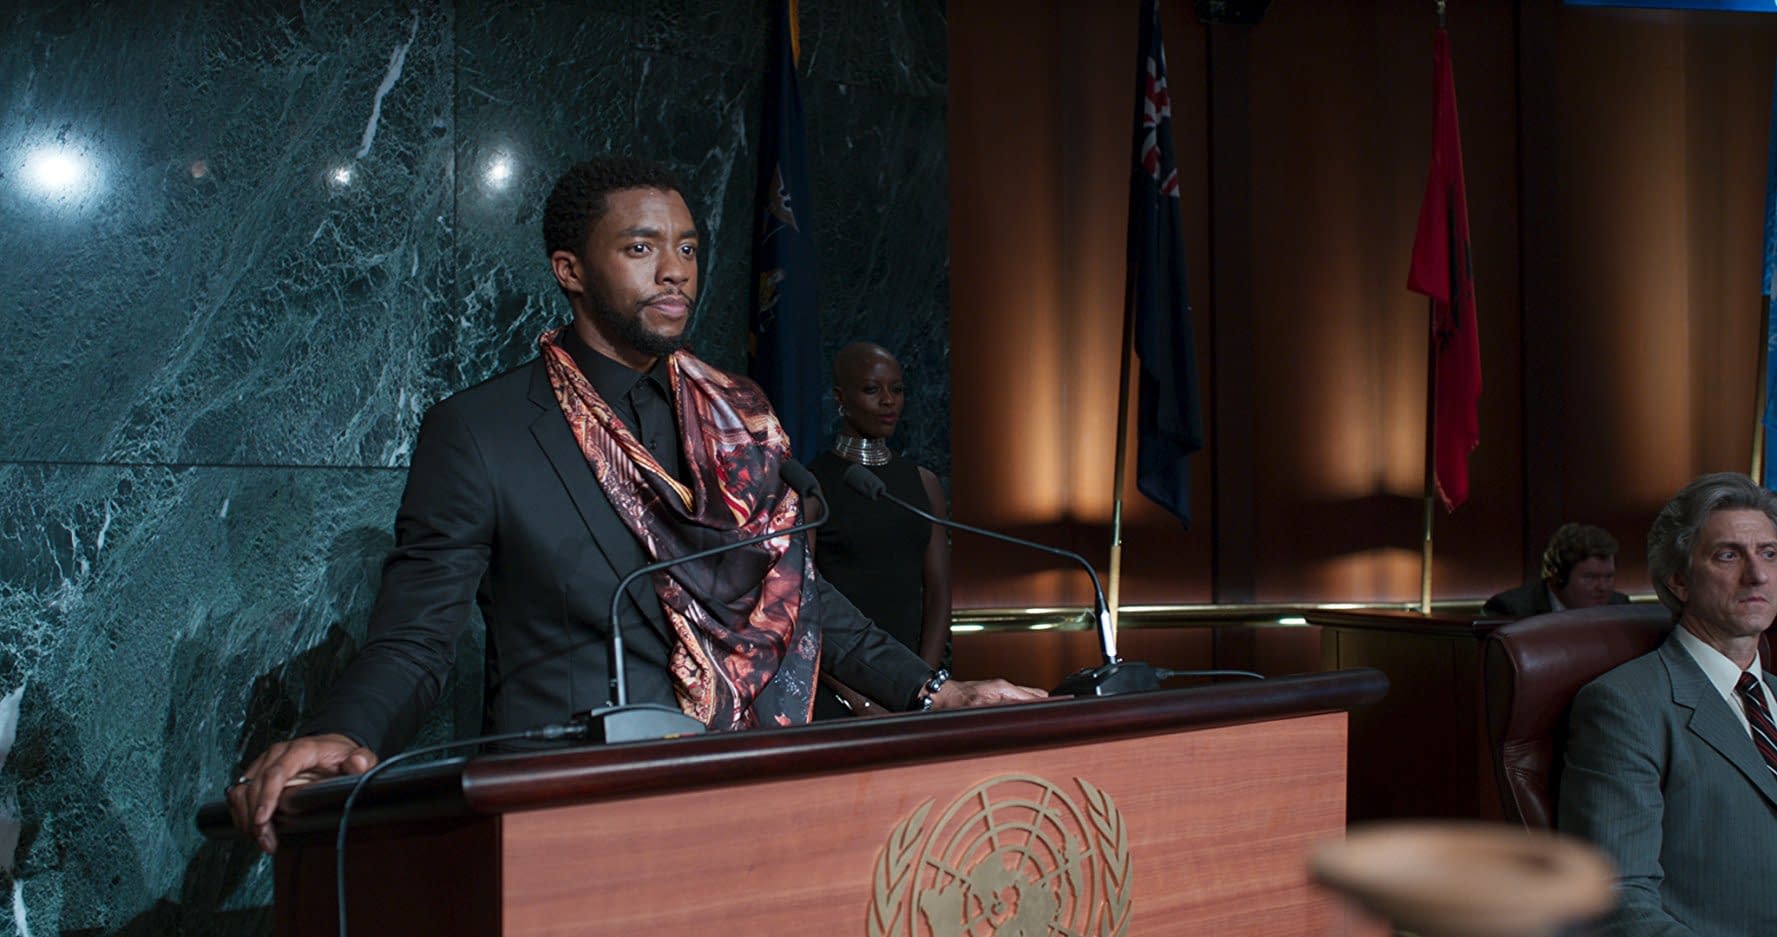 [SPOILERS] Black Panther: Ryan Coogler Talks the 2 After-Credits Scenes